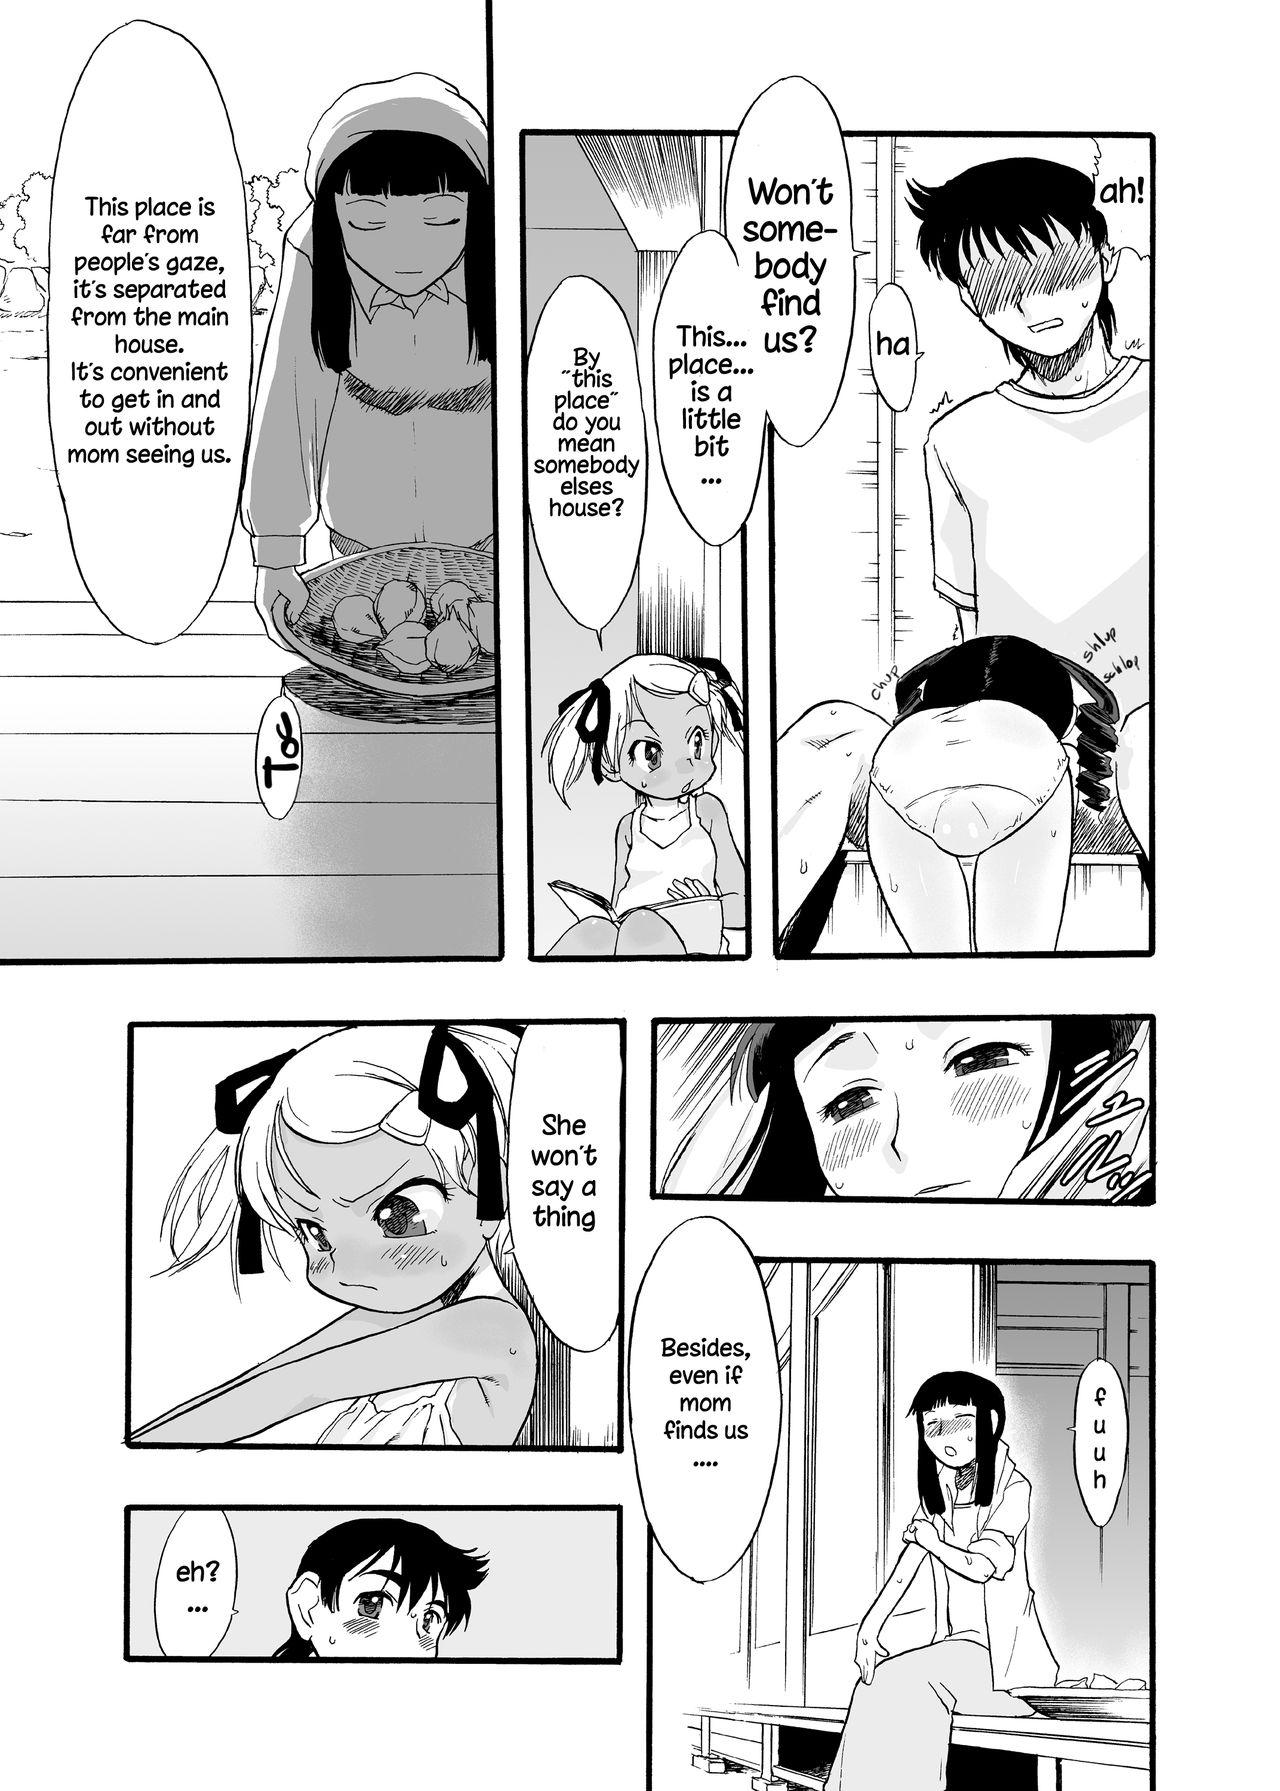 Crossdresser Nushi no Sumu Yama Vol. 8 | The God Who Dwell in the Mountain Chapter 8 - Original Roludo - Page 10